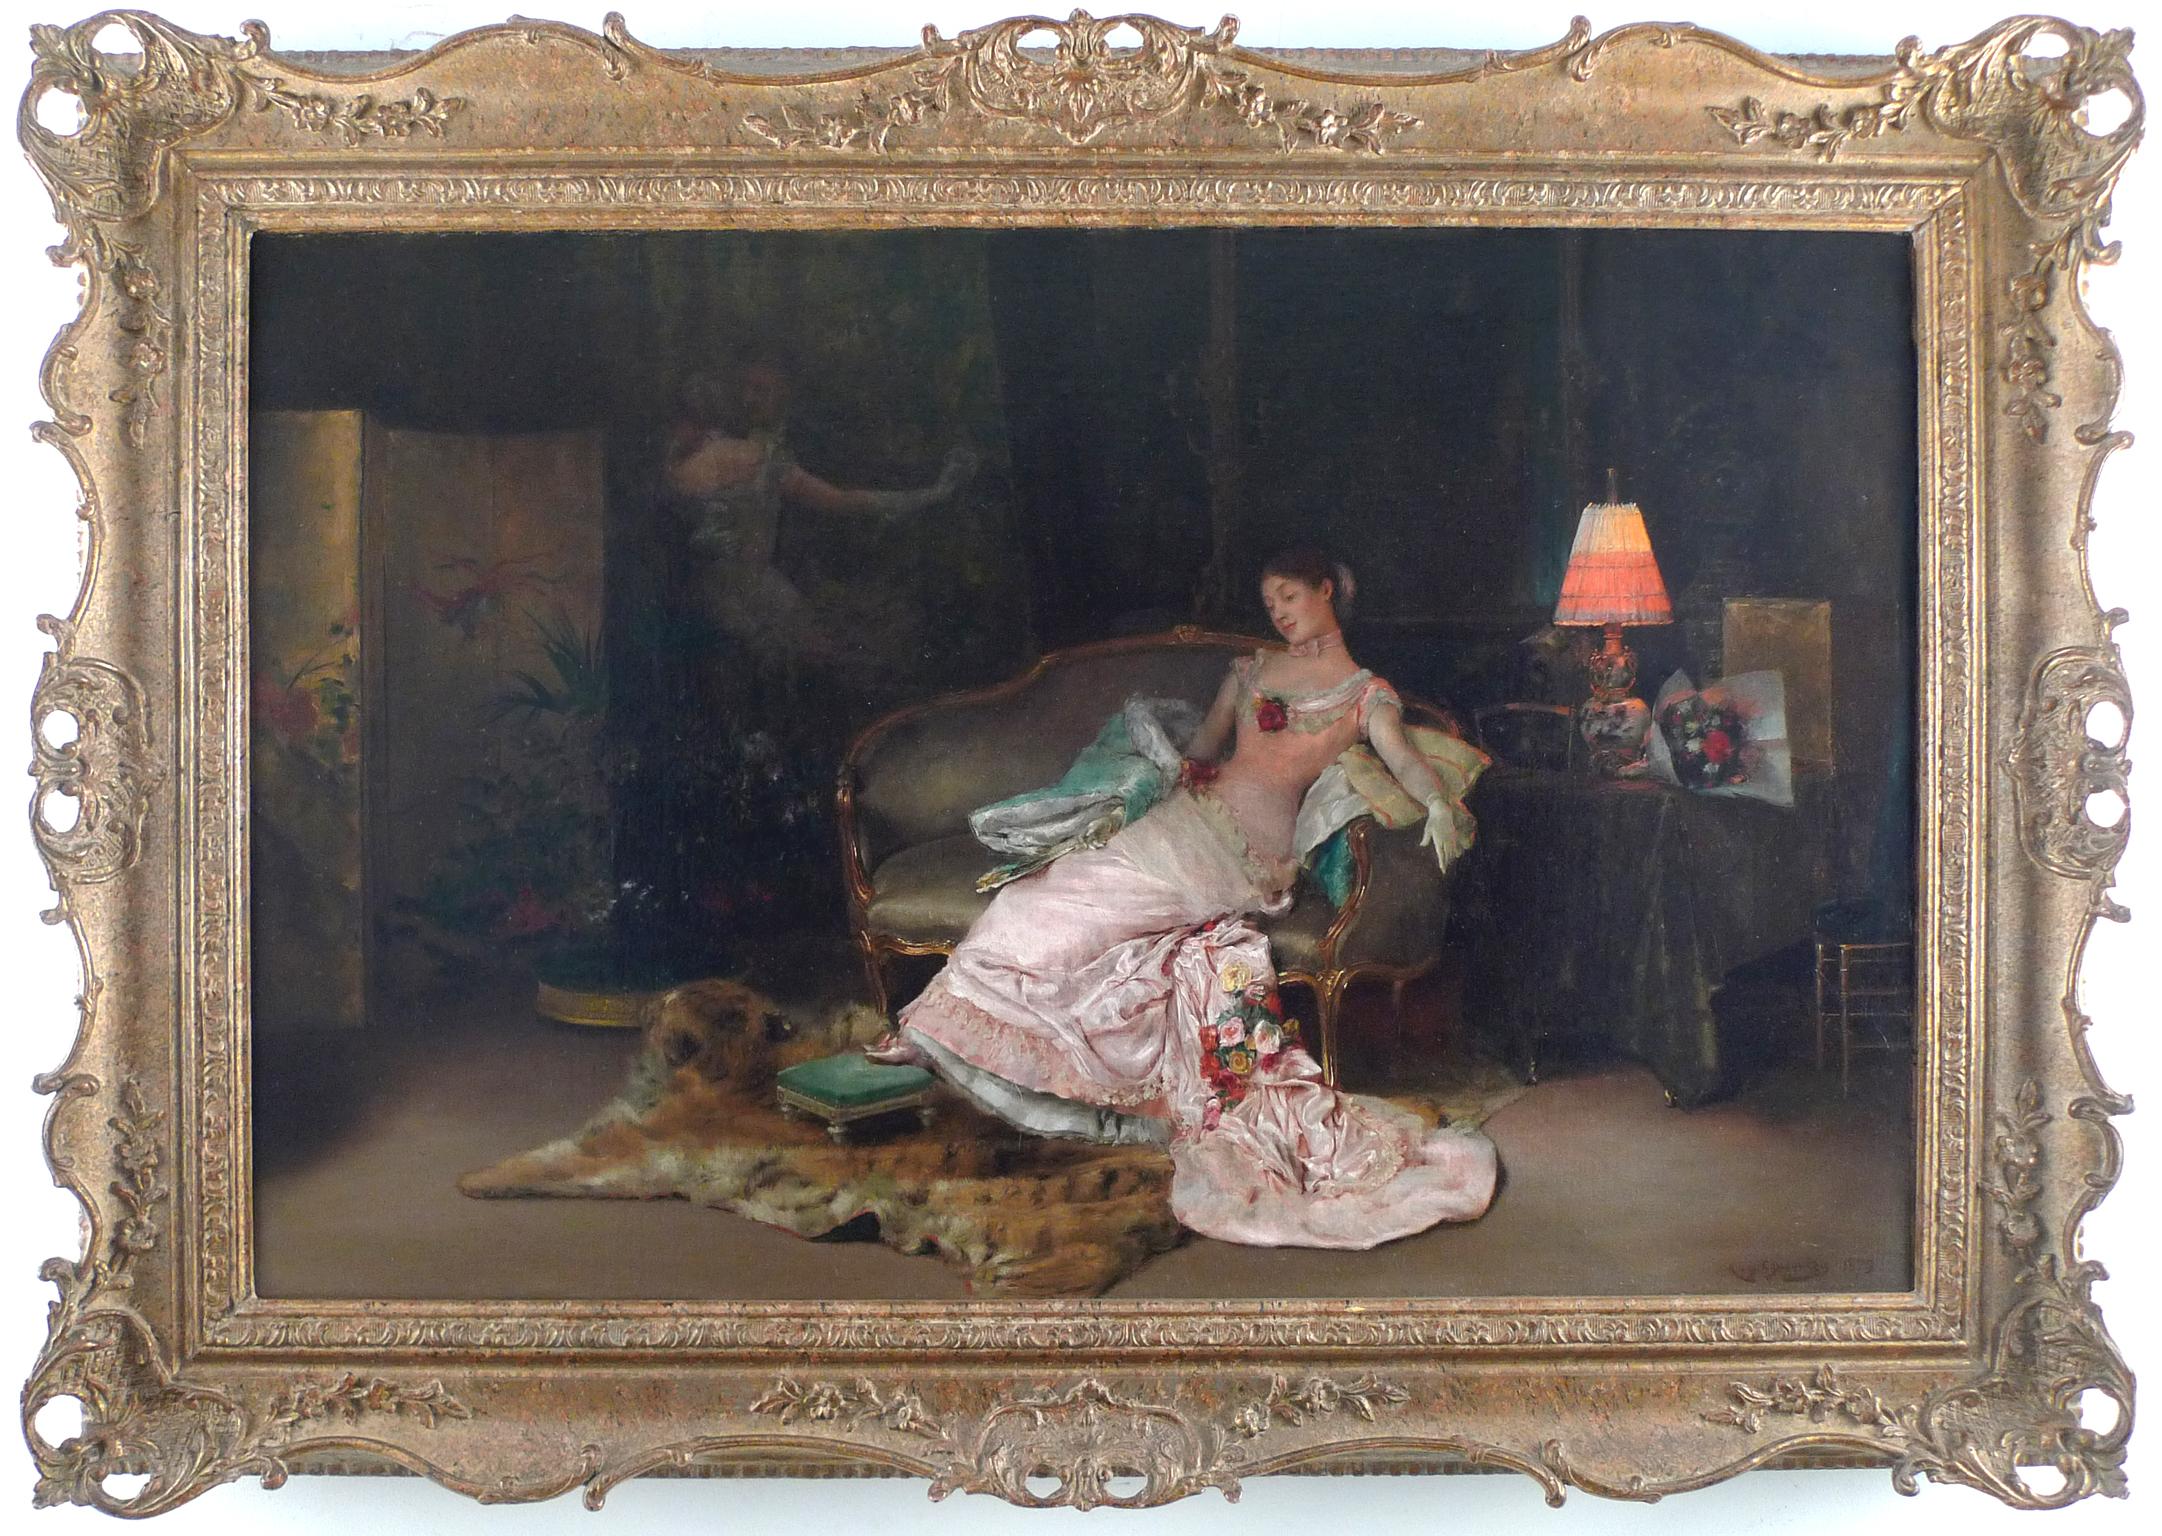 Rogelio de Egusquiza y Barrena Interior Painting - "A Reverie During The Ball", 19th Century Oil on Canvas by Rogelio Egusquiza